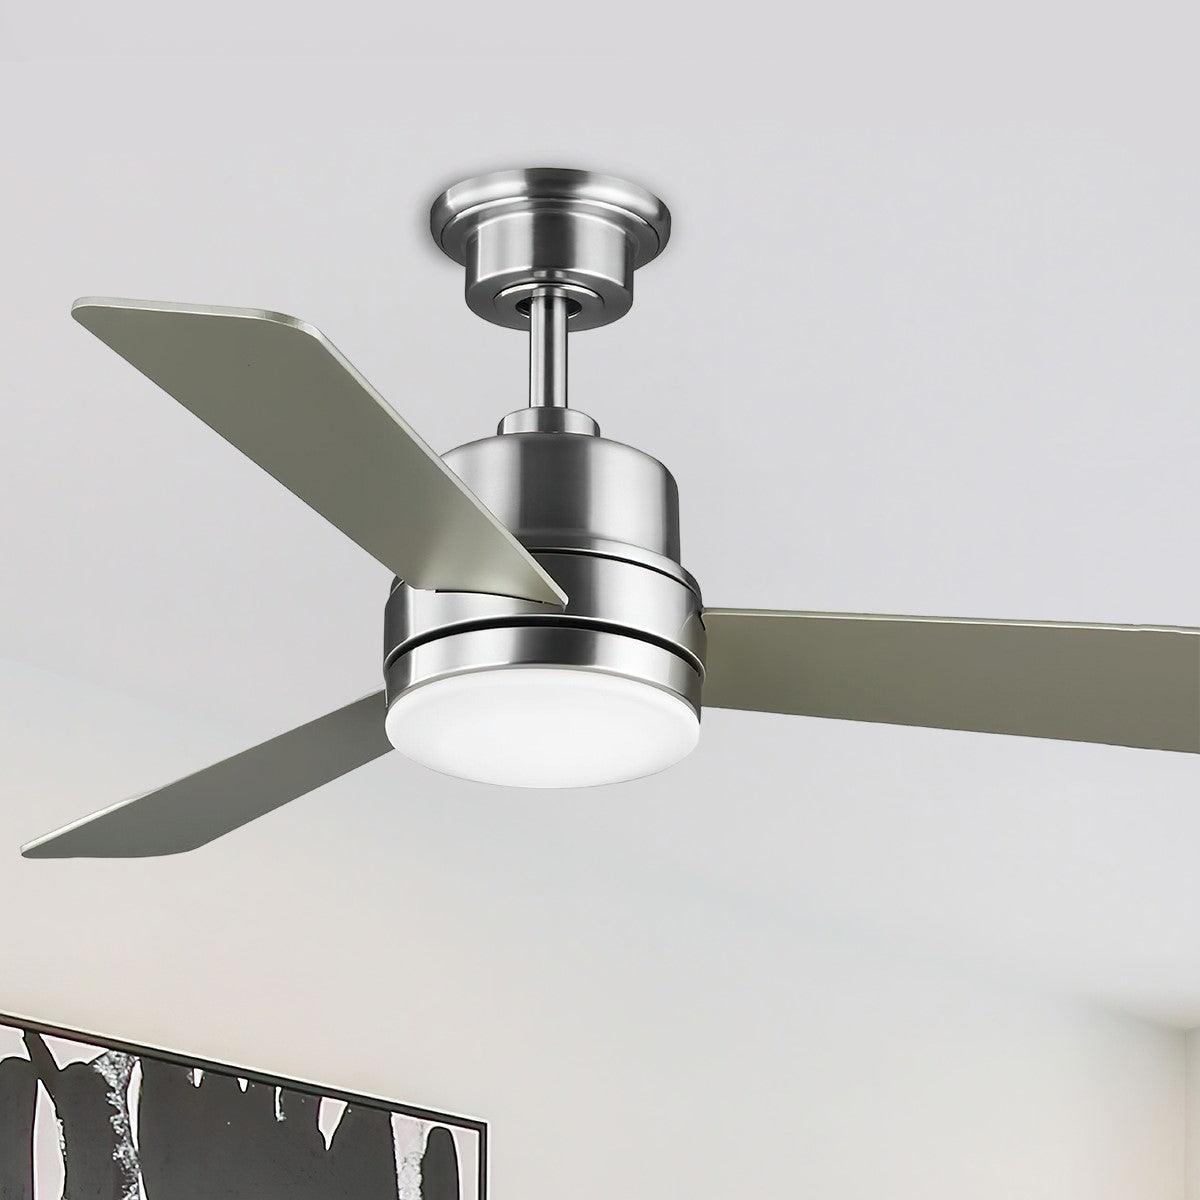 Trevina II 44 Inch Modern Ceiling Fan With Light, Wall Control Included